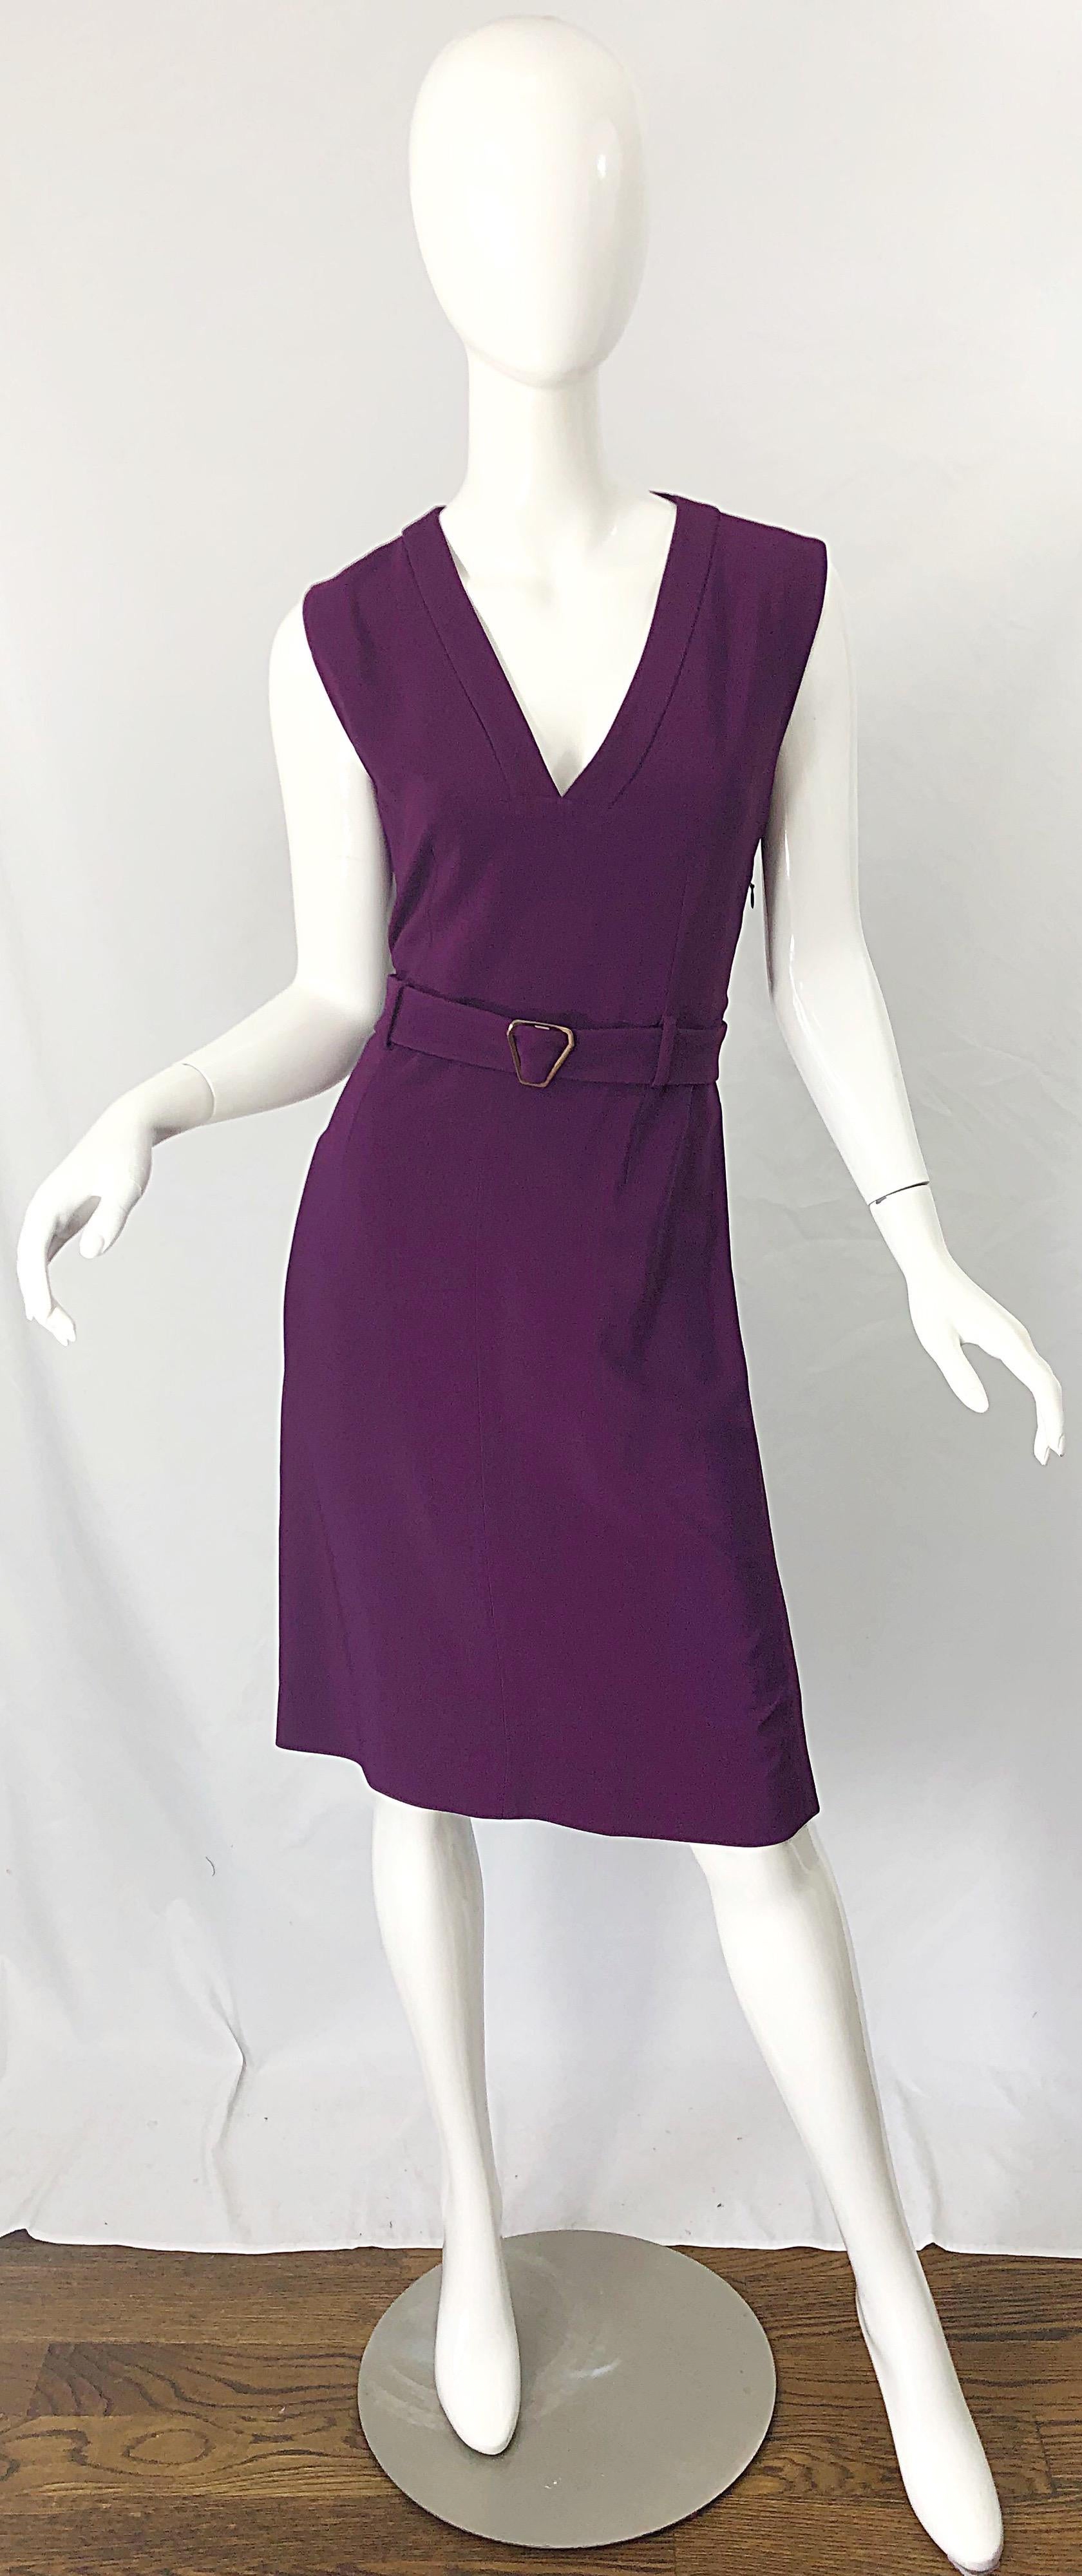 Chic YVES SAINT LAURENT Rive Gauche by Stefano Pilati purple belted sleeveless dress ! This dress is extra special as it hails from Pilati's final season at YSL.
Features a beautiful rich shade of purple. Detachable matching belt features a rose